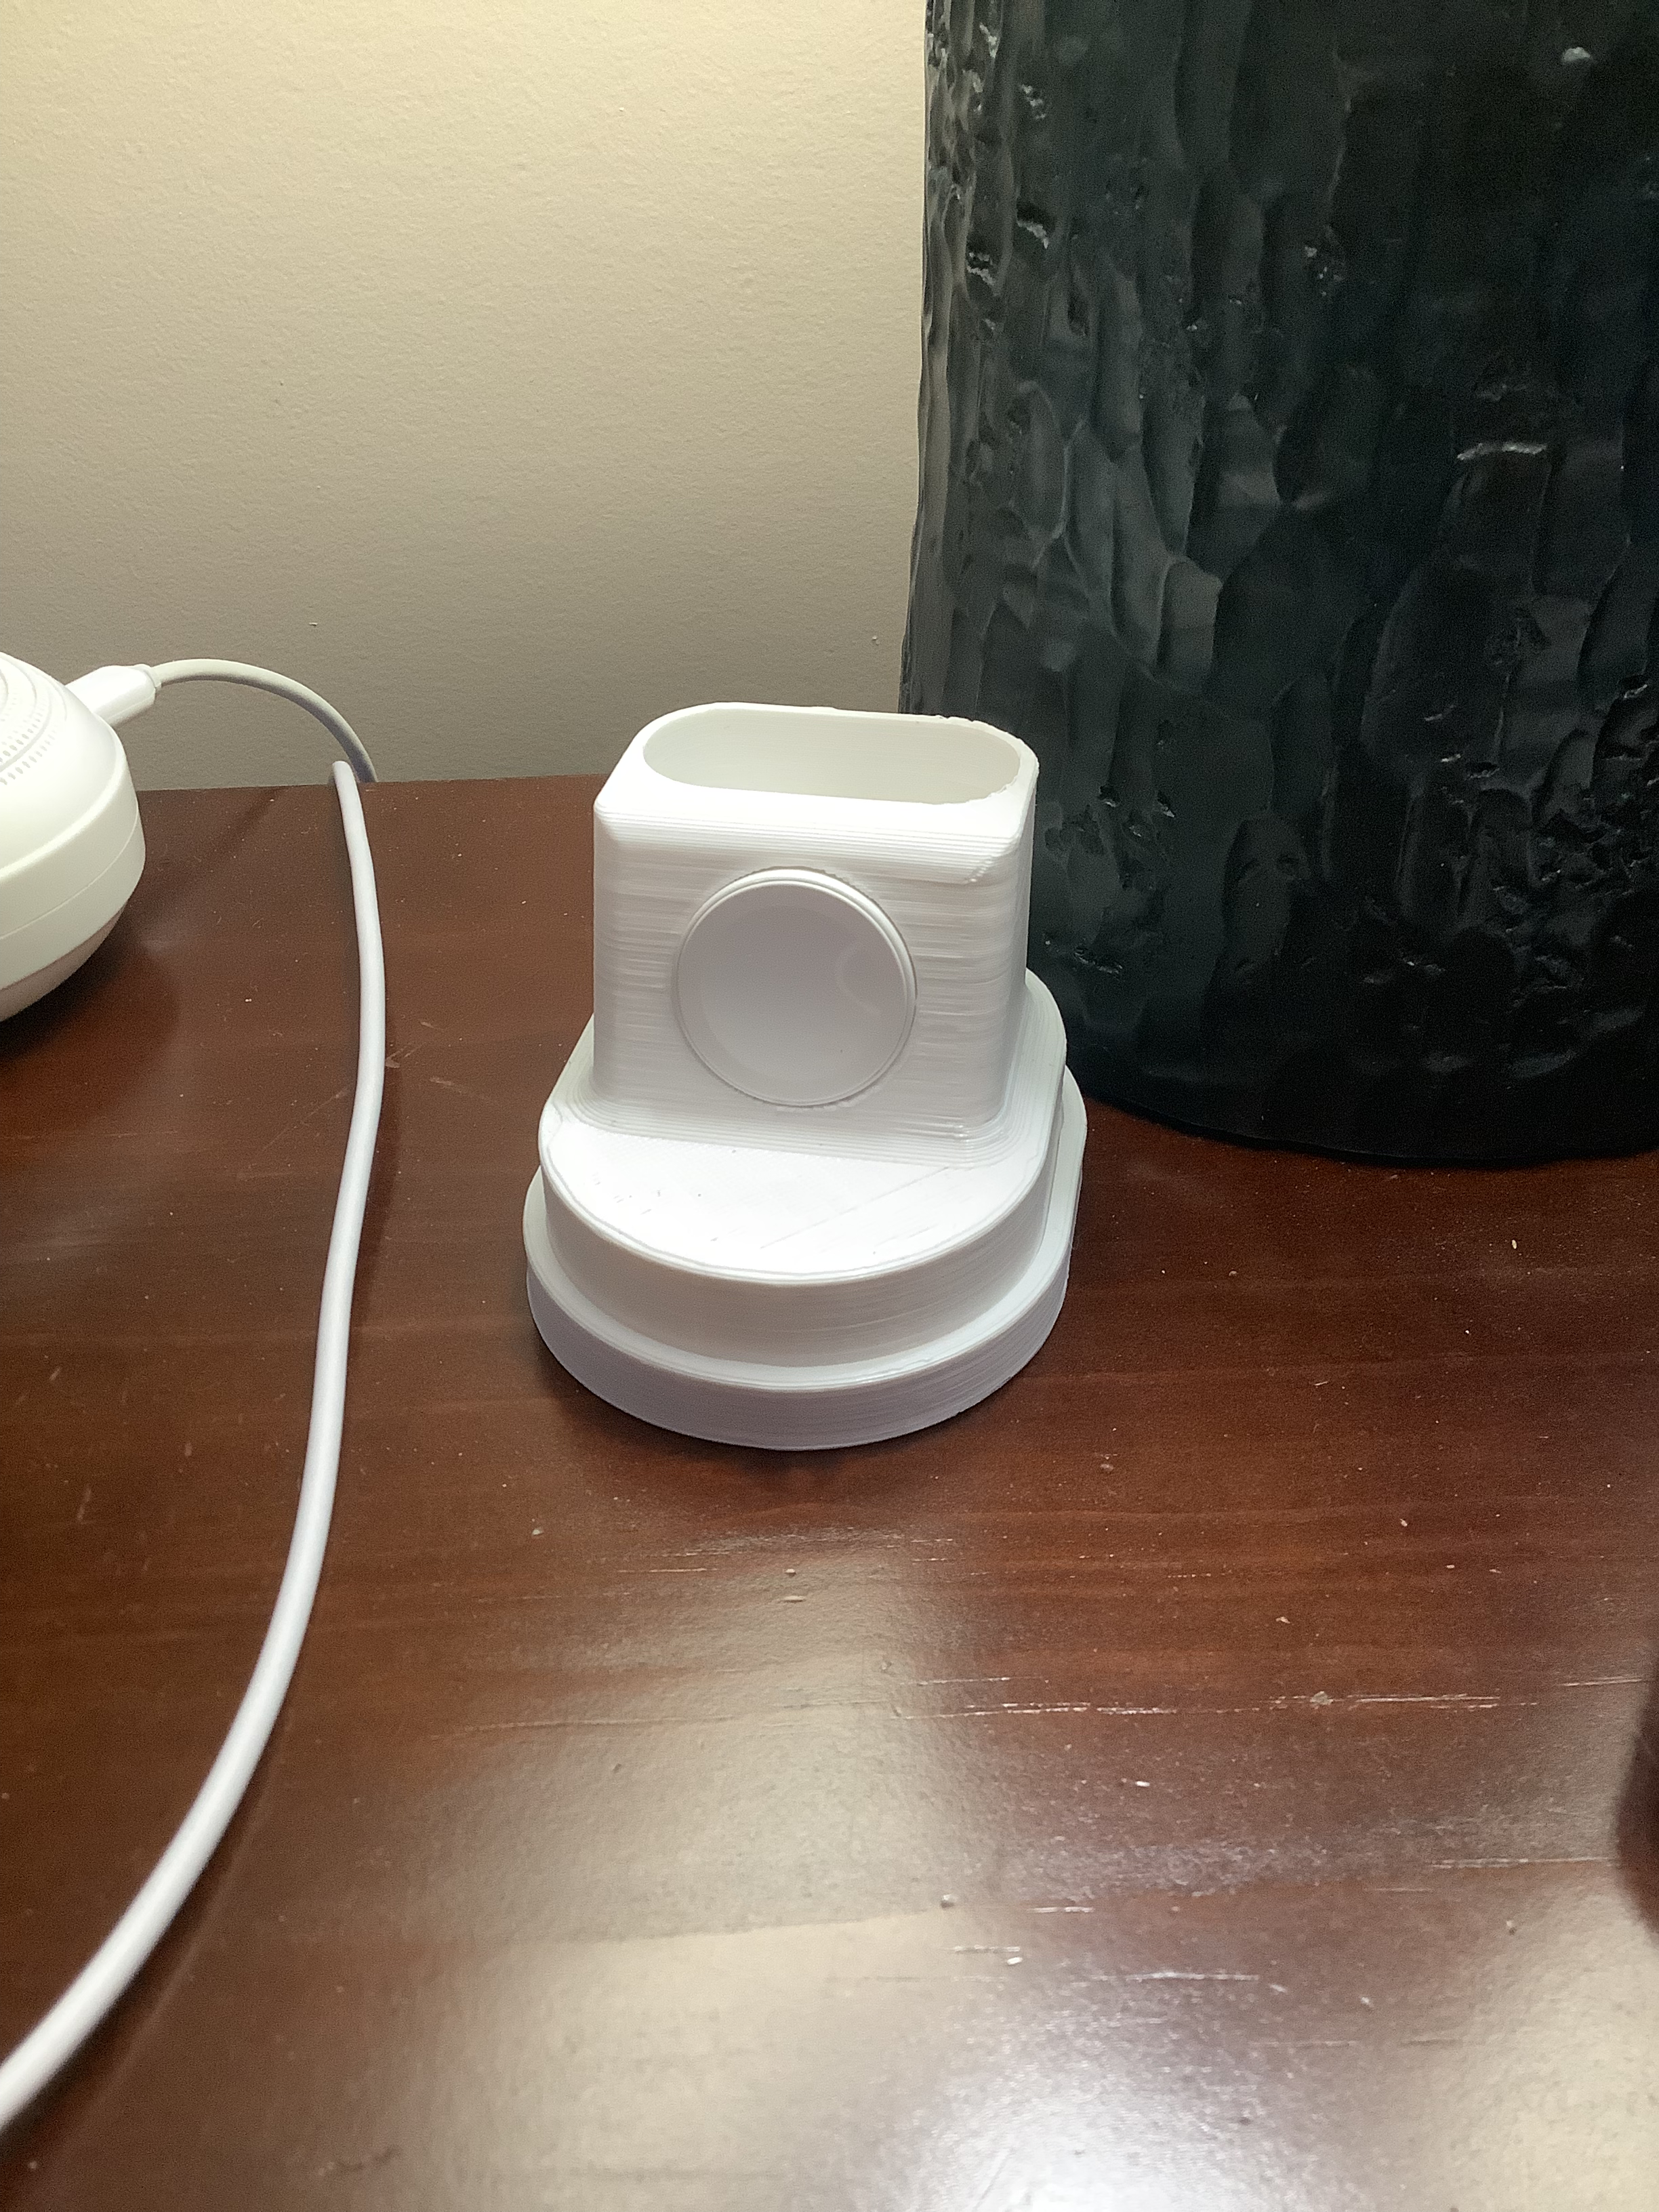 Apple Watch and Airpod Charging Dock